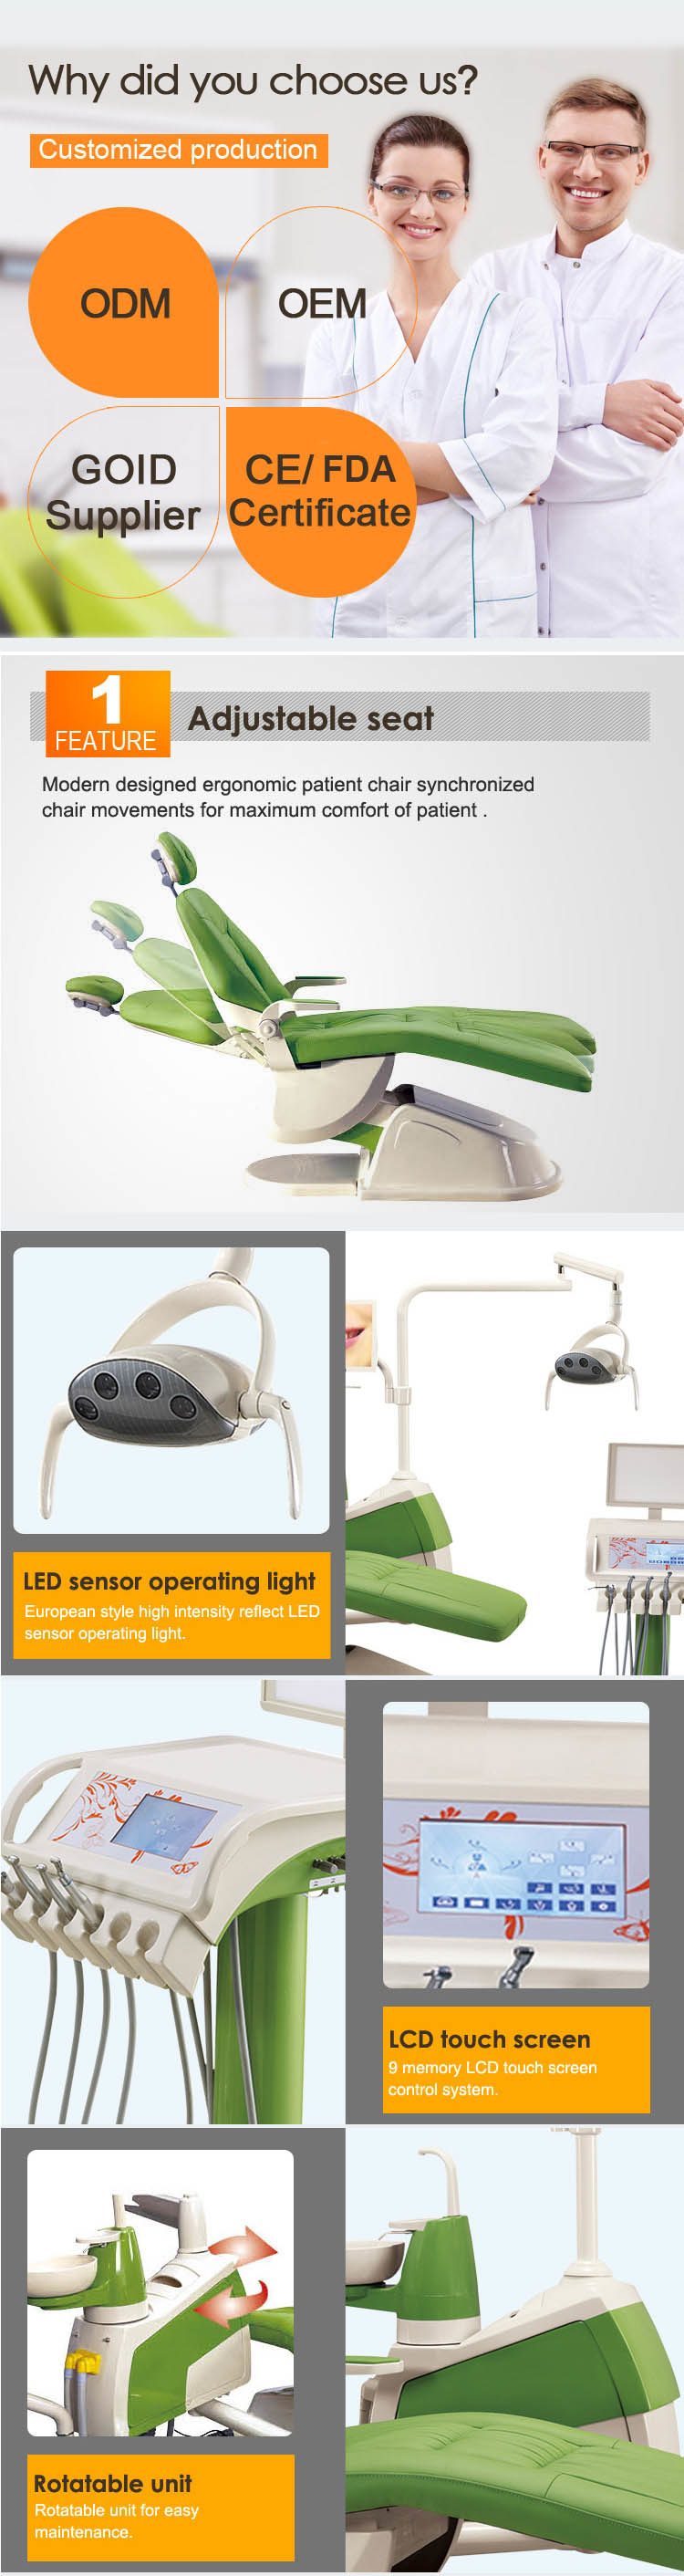 Fashion Design ISO Approved Dental Chair Mobile Dental Unit/Dental Implant Dentist/Dental Hygiene Instruments